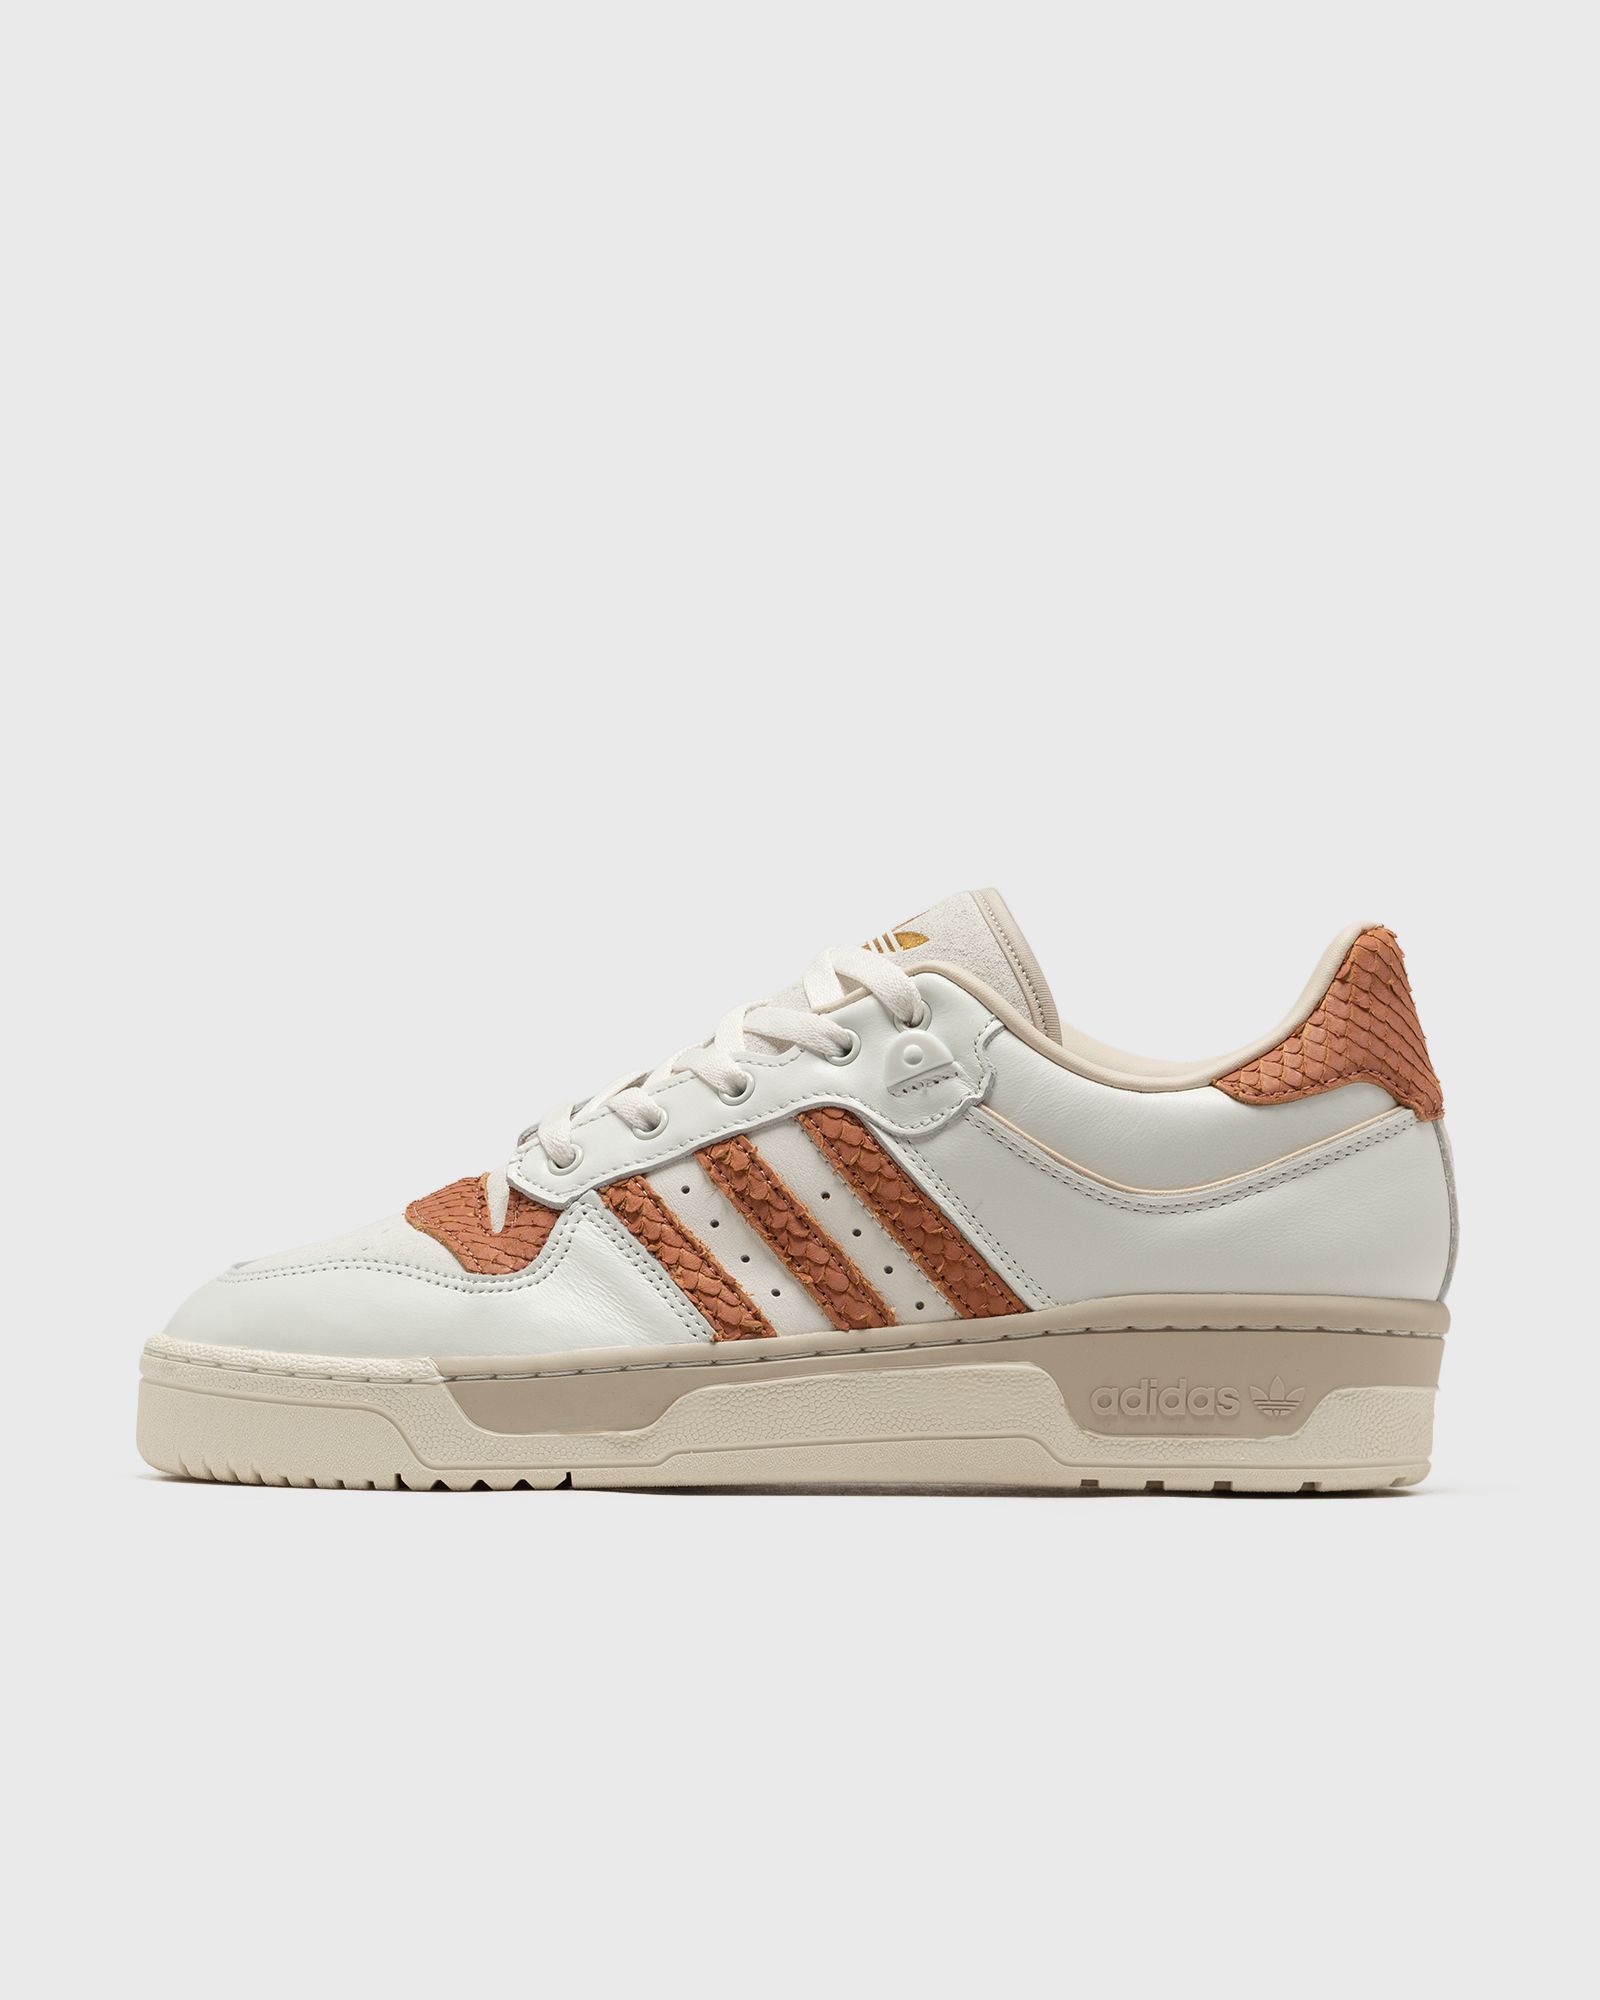 Adidas - rivalry low 86 men lowtop brown|white in größe:45 1/3